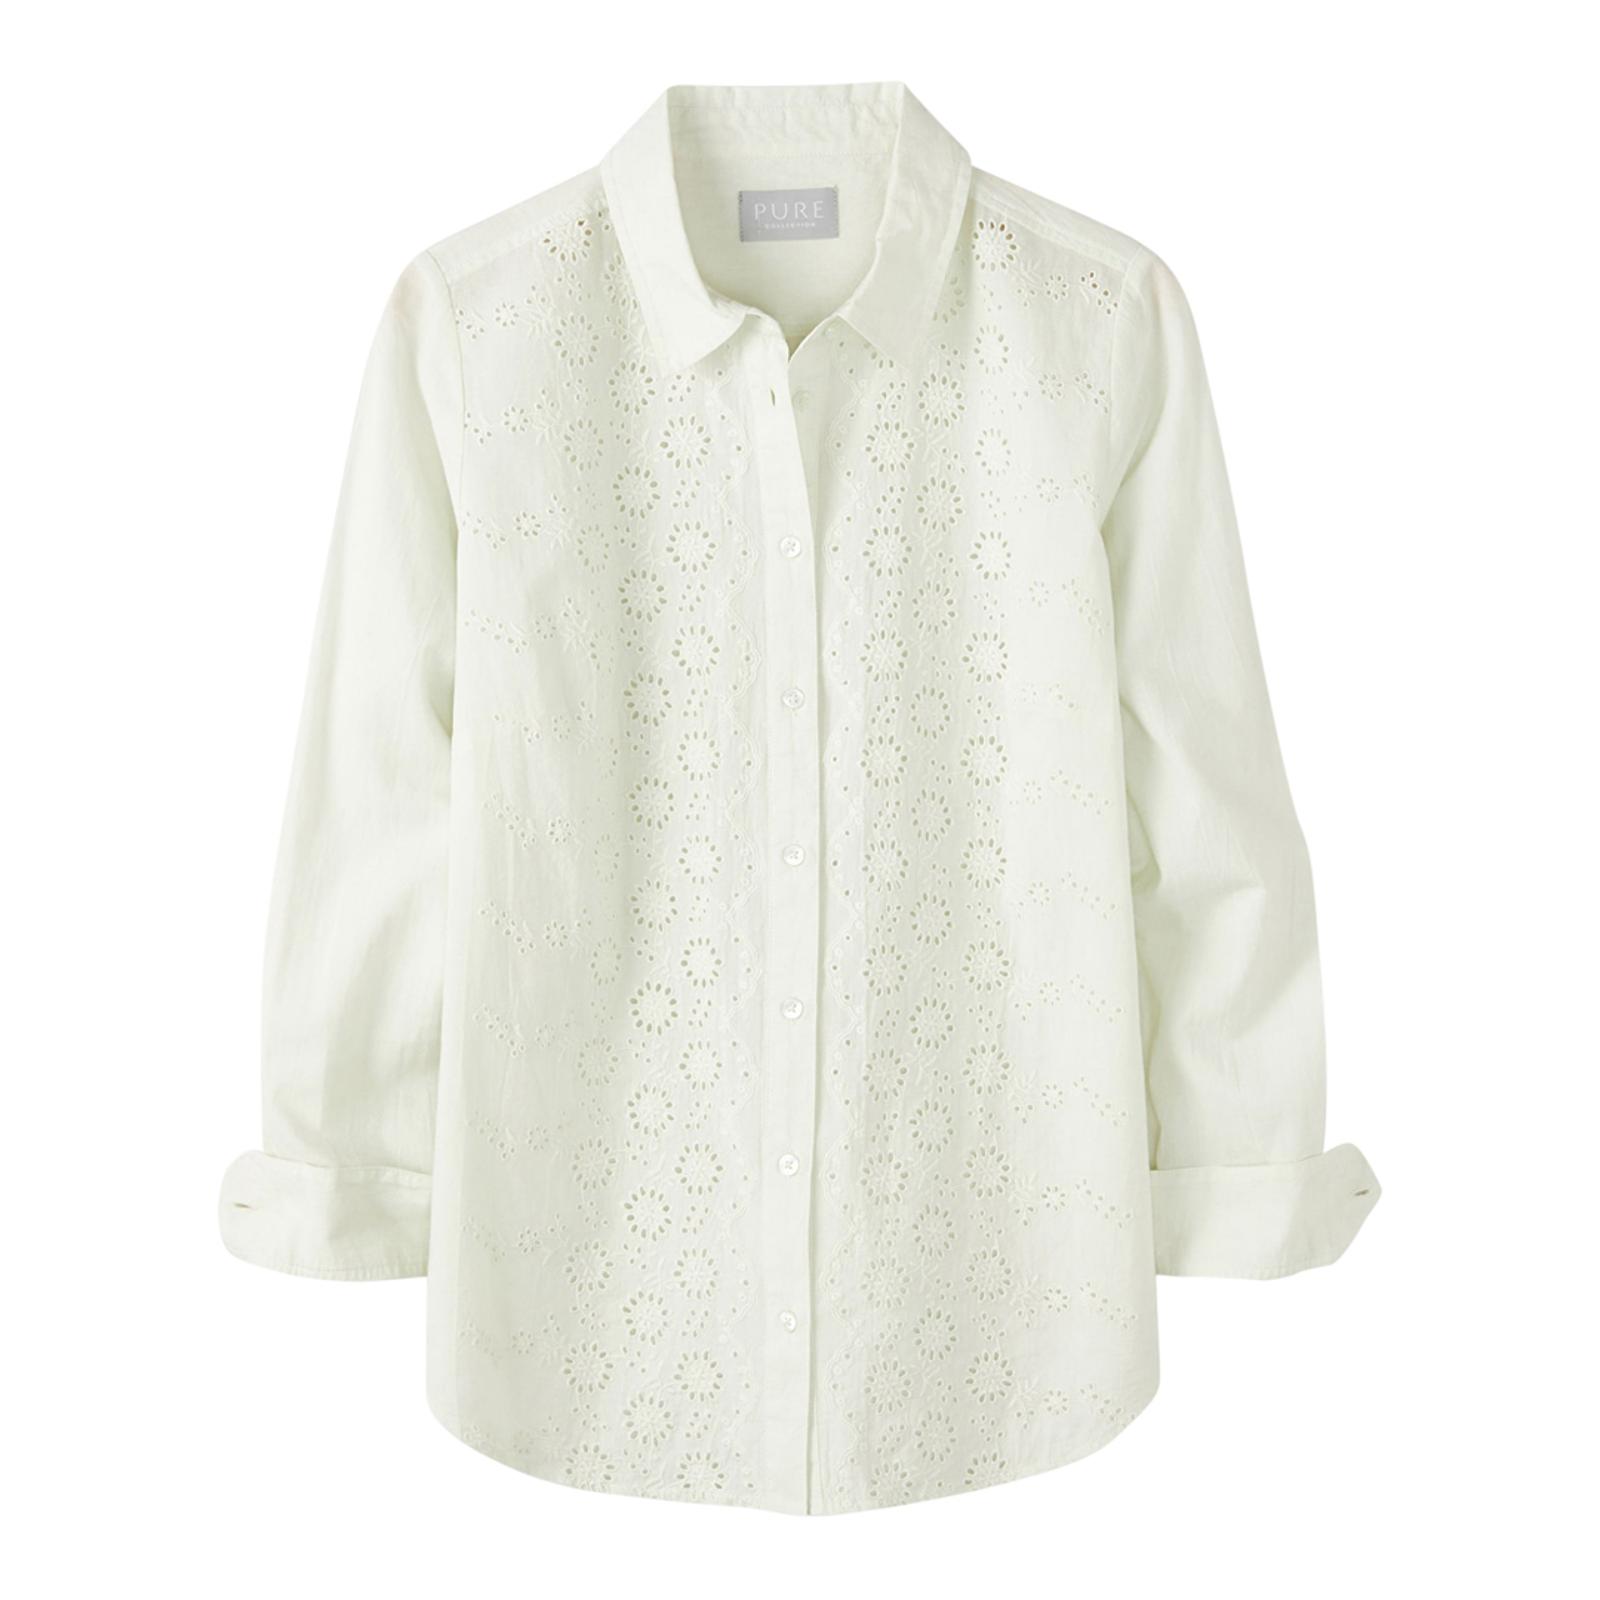 Bloom Green Broderie Anglaise Front Cotton Shirt - BrandAlley